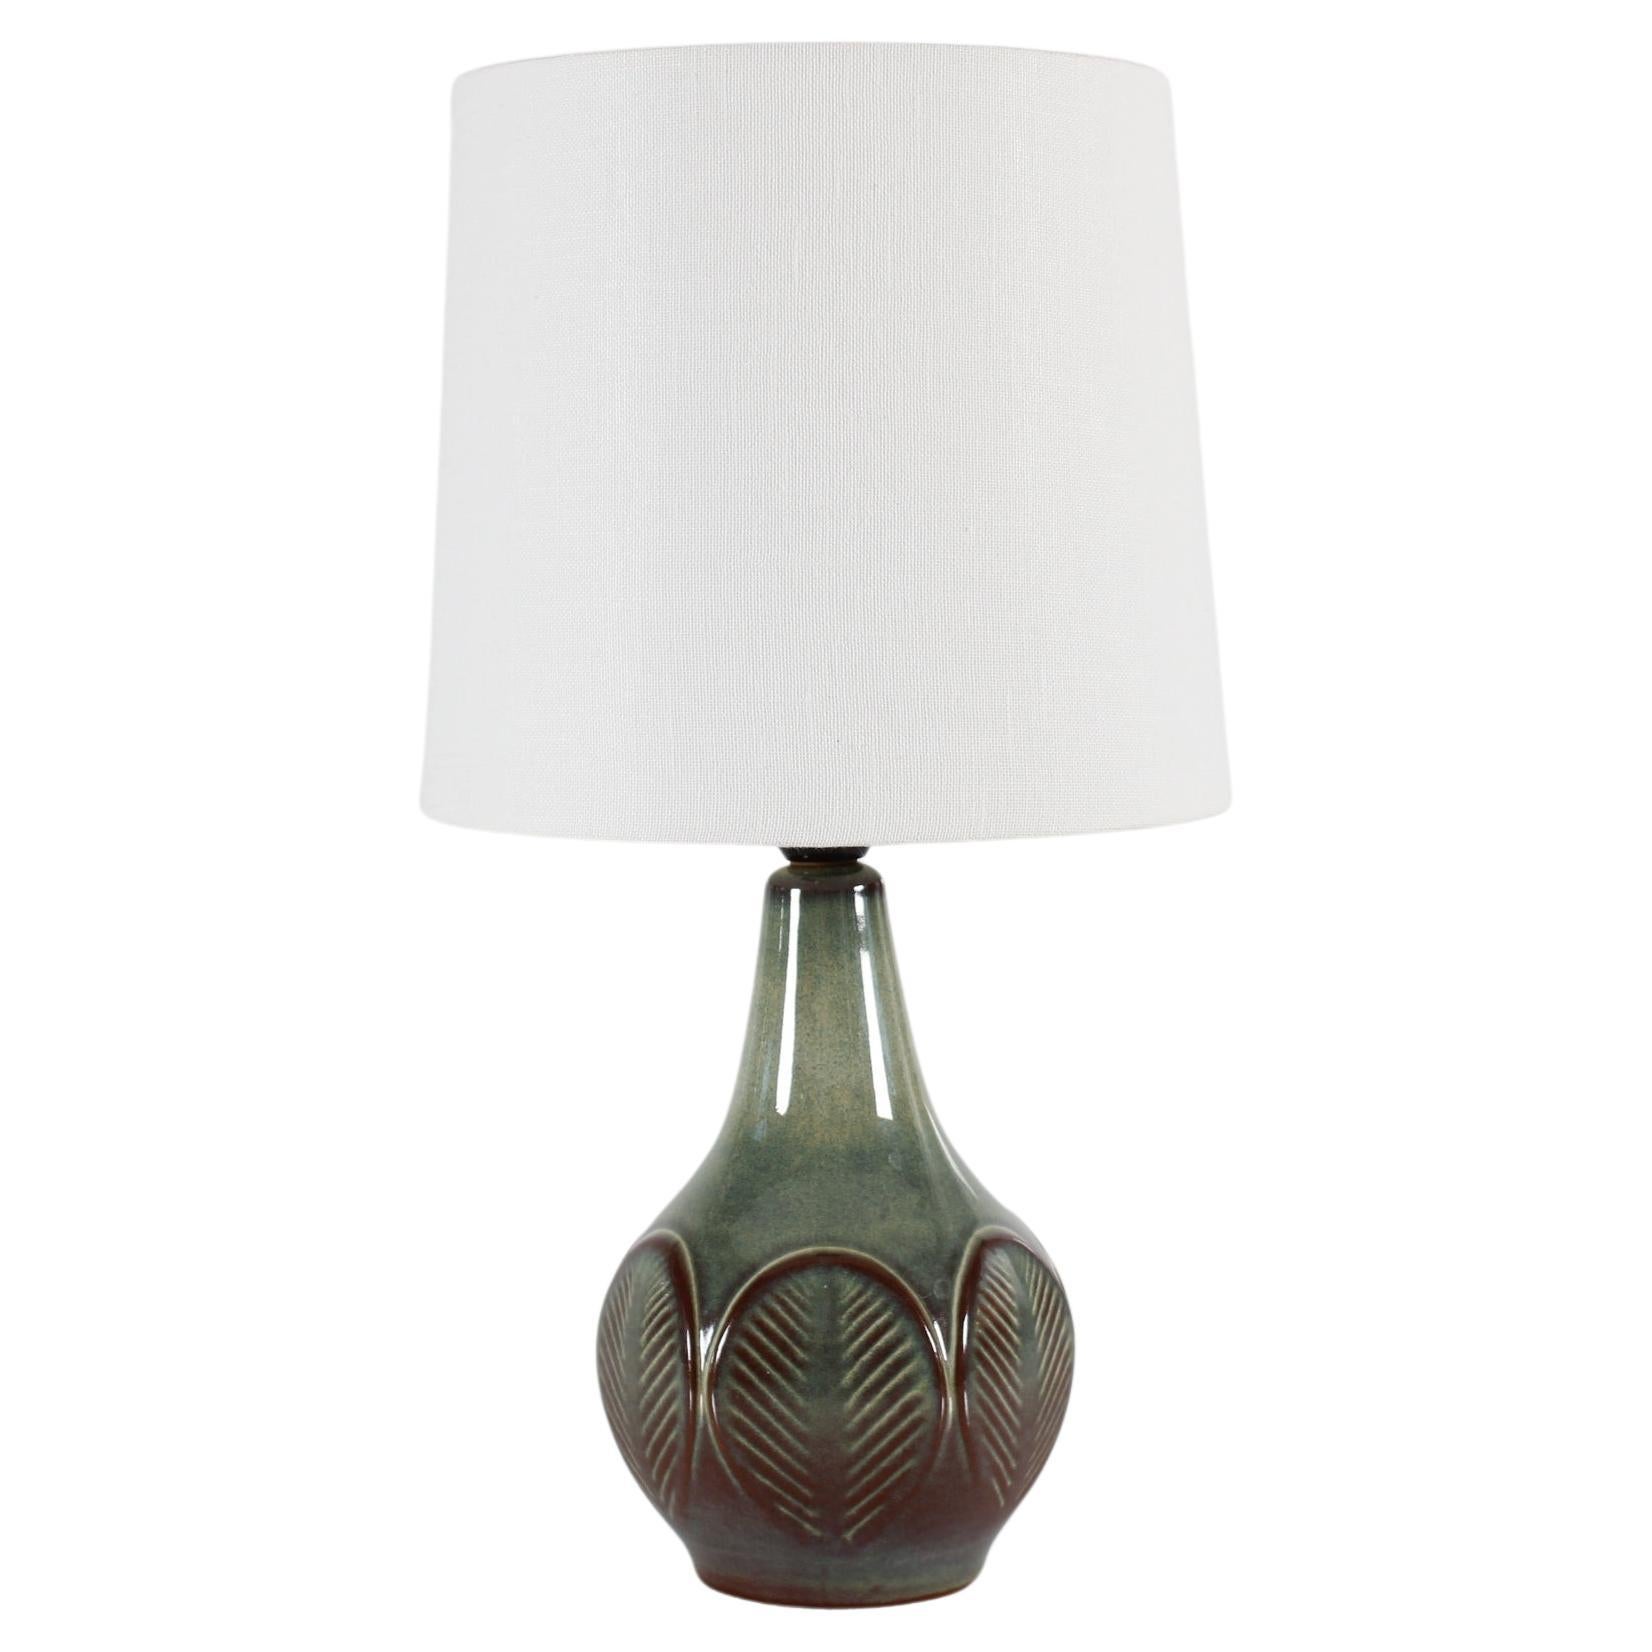 Danish Søholm Table Lamp with Leaf Pattern and Green Glossy Glaze, 1960s